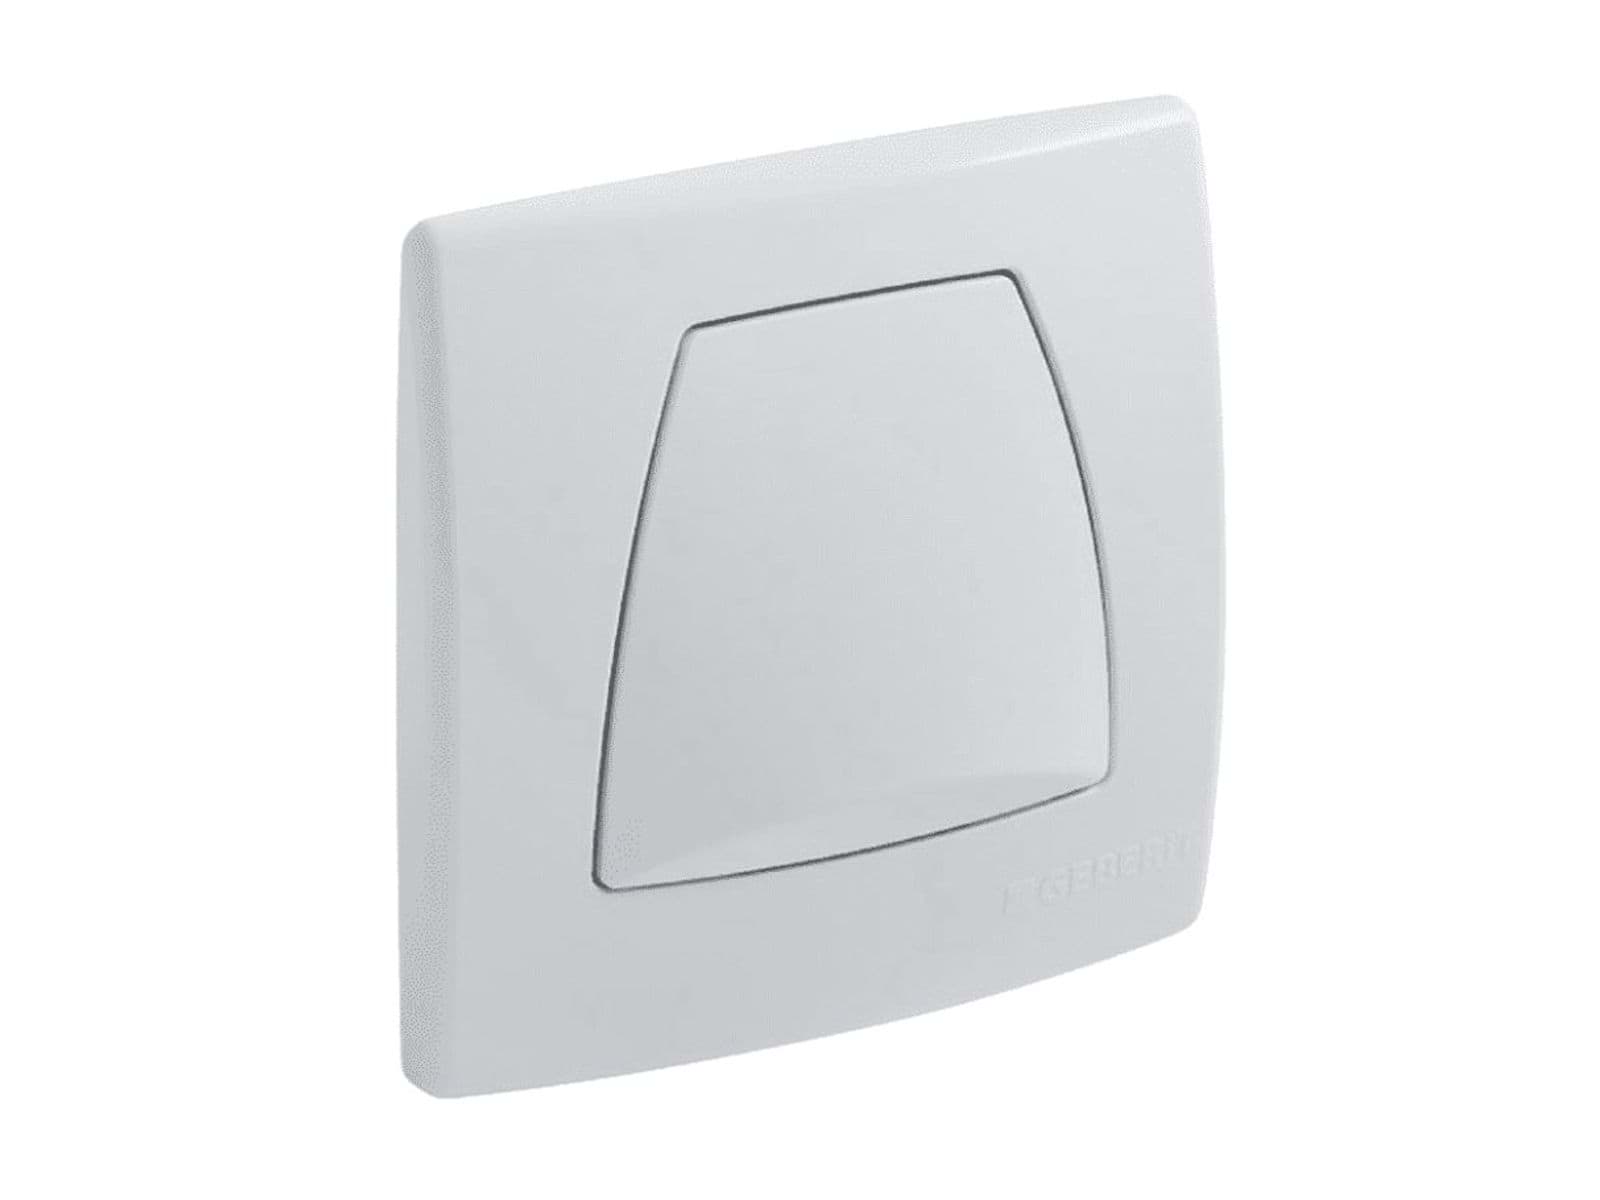 Picture of GEBERIT flush plate Twinline, for urinal flush control with pneumatic flush actuation 240.562.11.1 white alpine